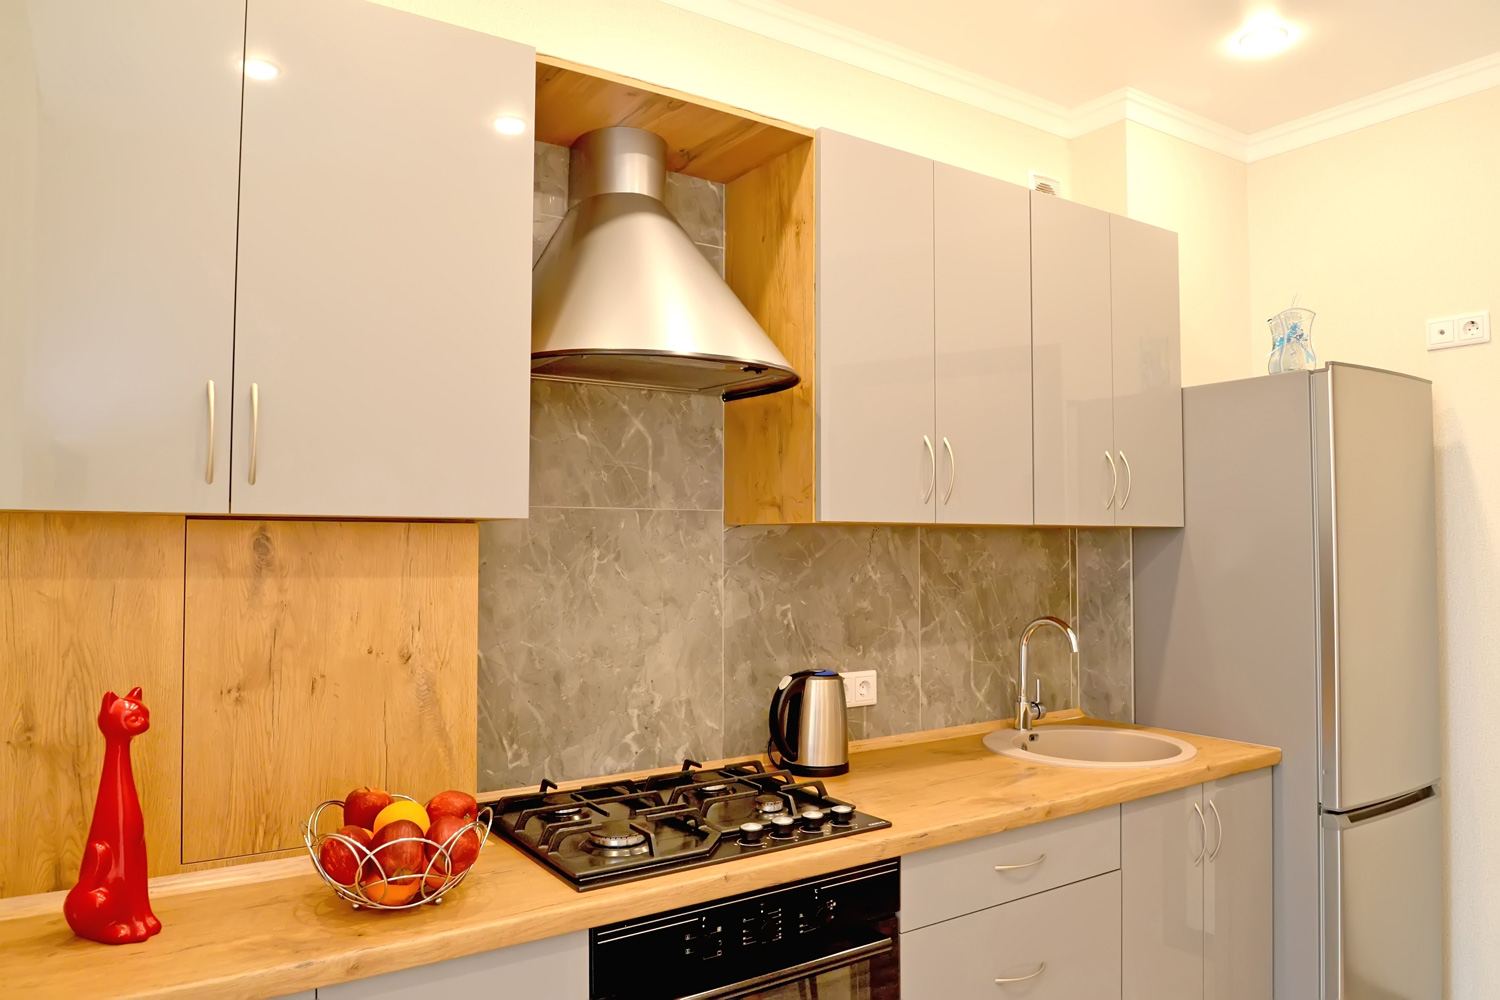 Interior of a modern kitchen with a range hood